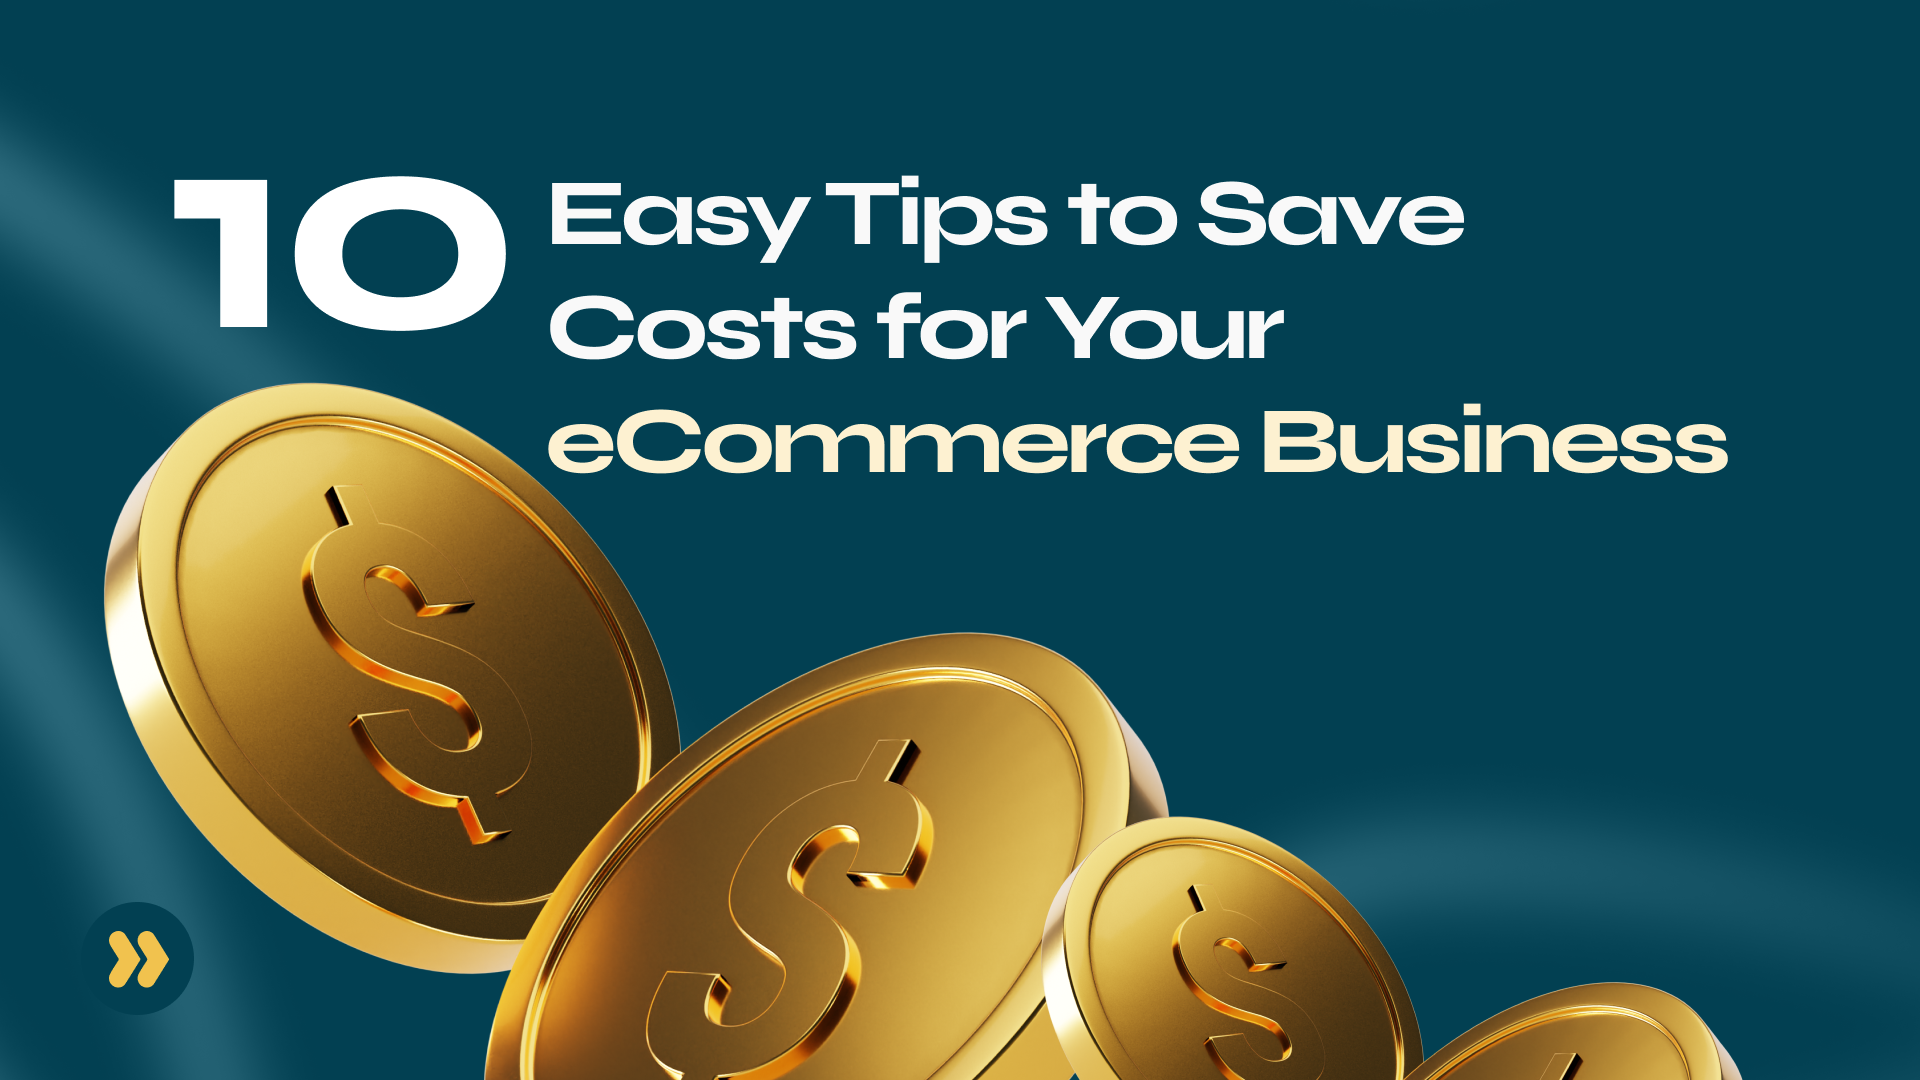 10 Easy Tips to Save Costs for Your eCommerce Business